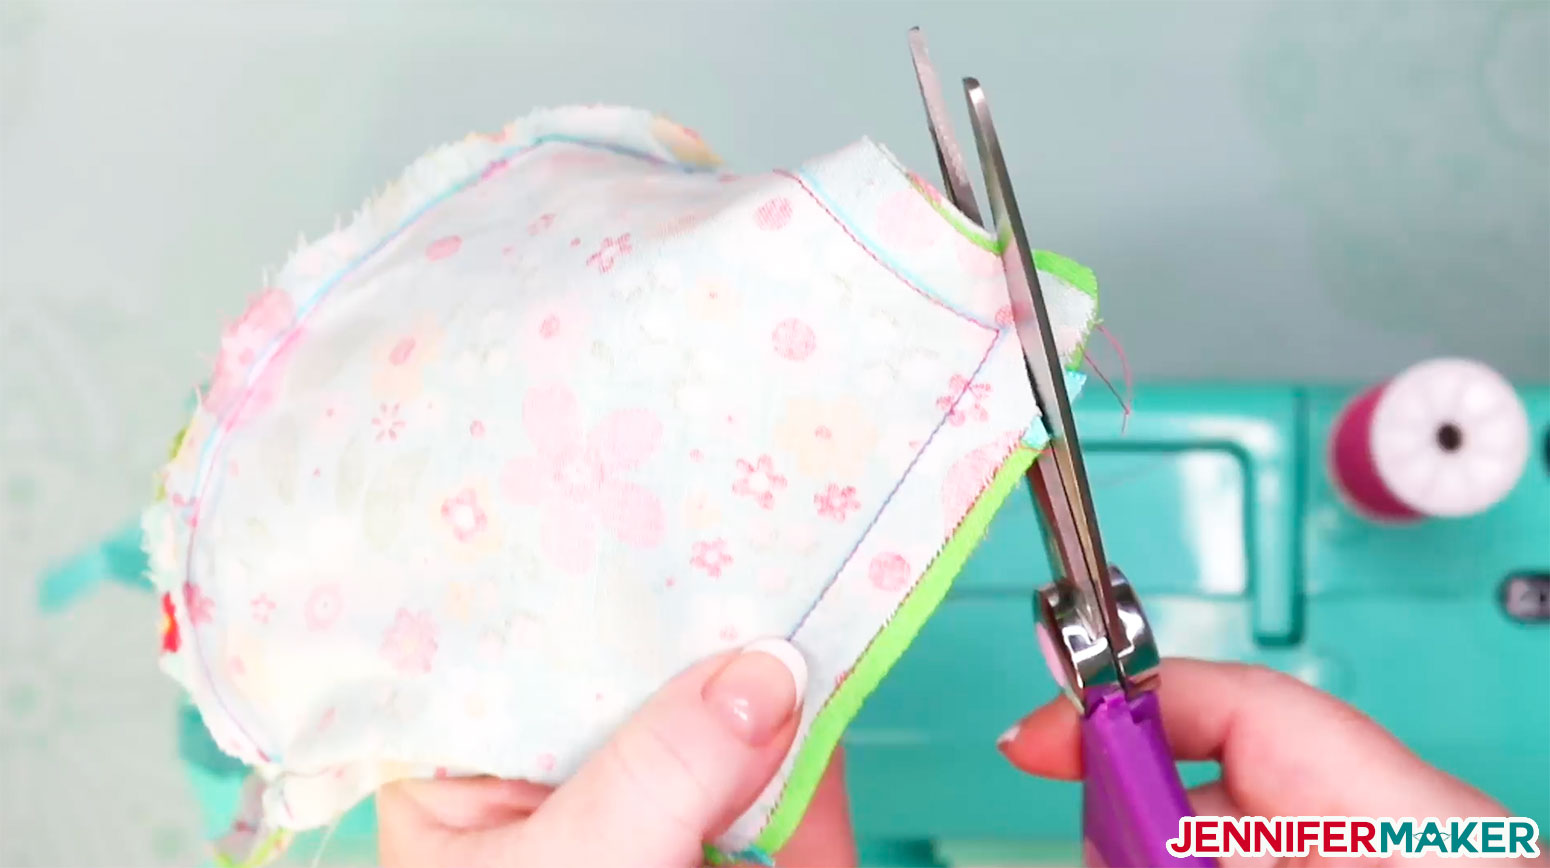 Clip the corners of your homemade face mask with scissors to reduce bulk